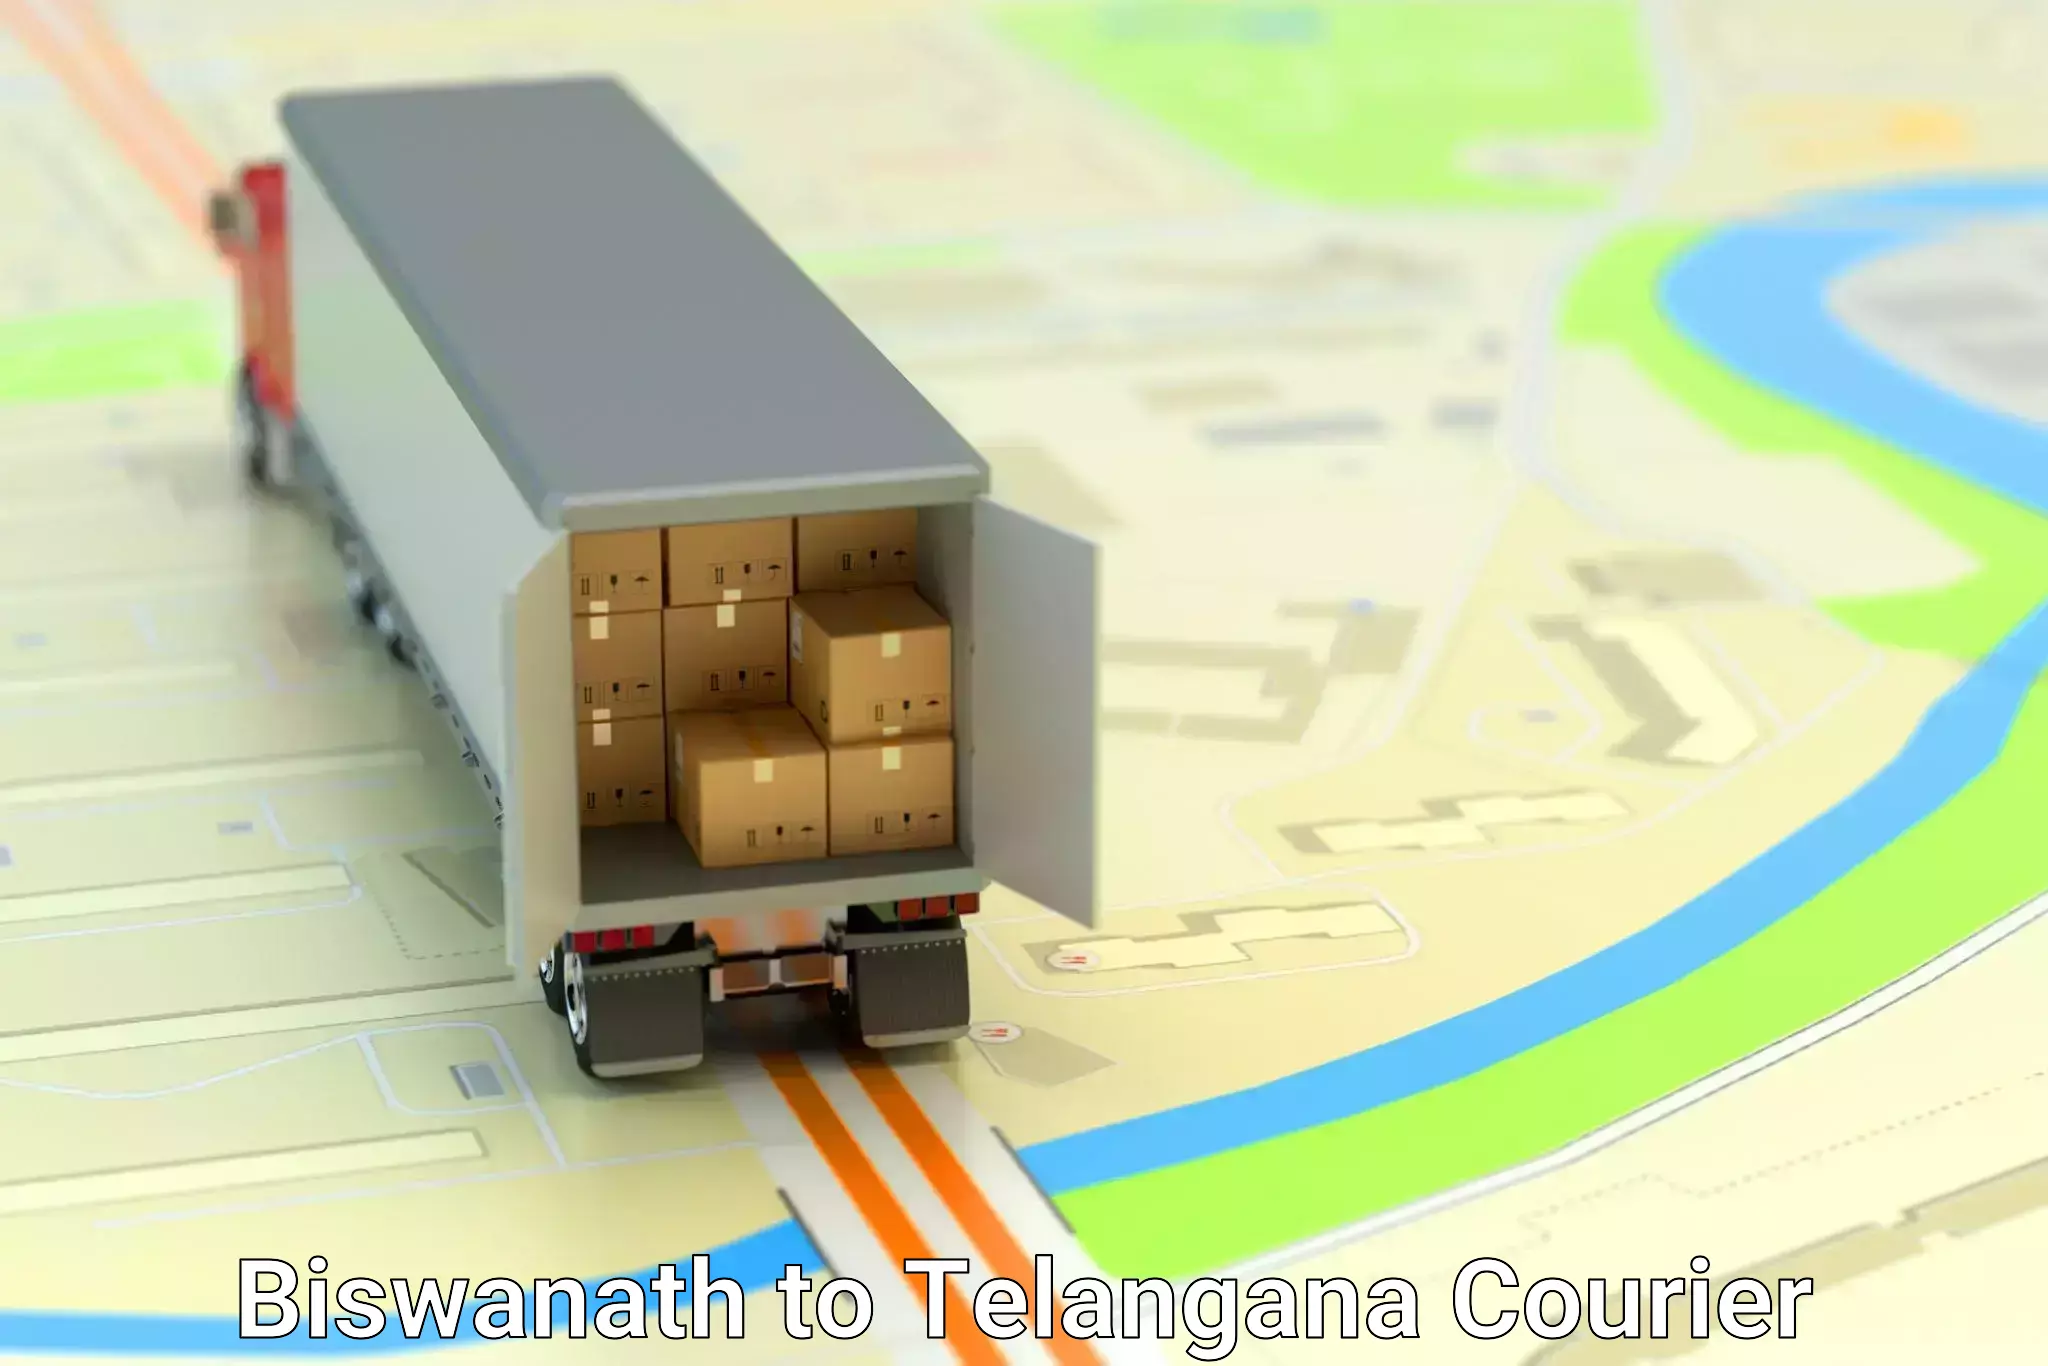 Courier service innovation Biswanath to Trimulgherry